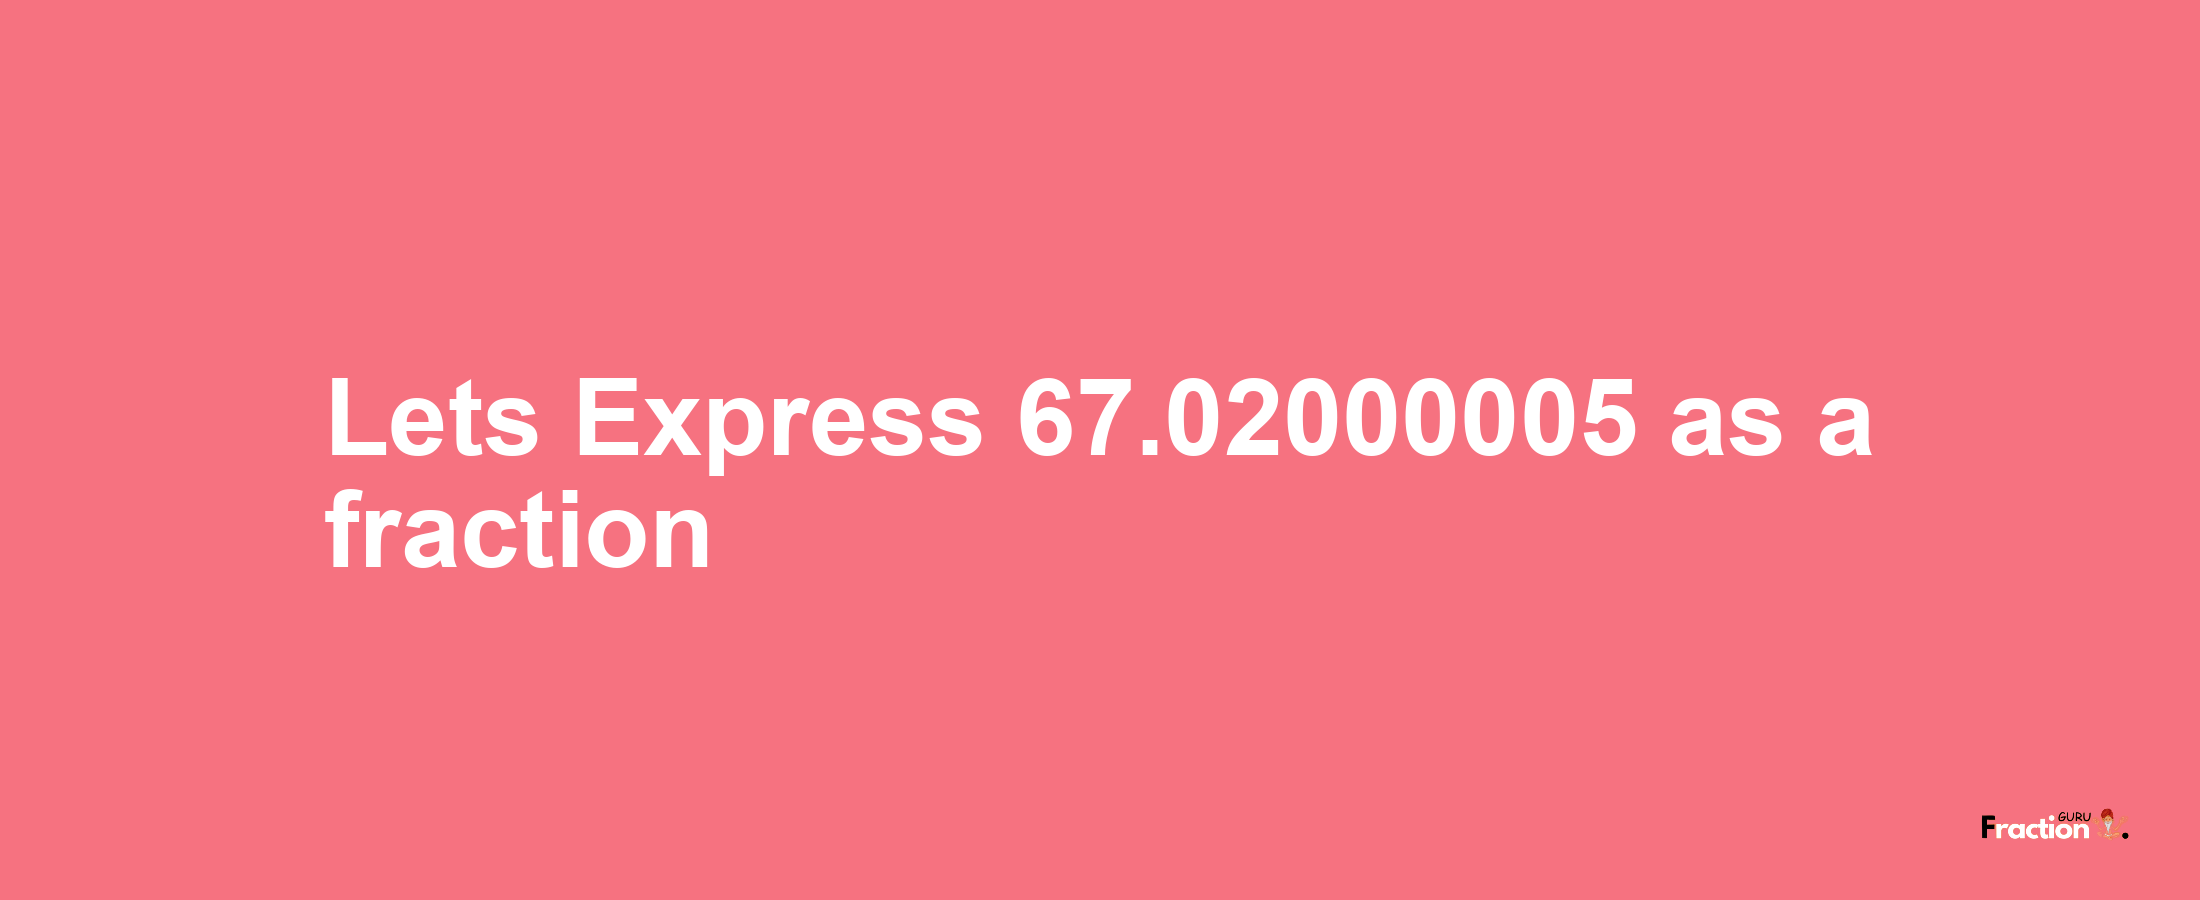 Lets Express 67.02000005 as afraction